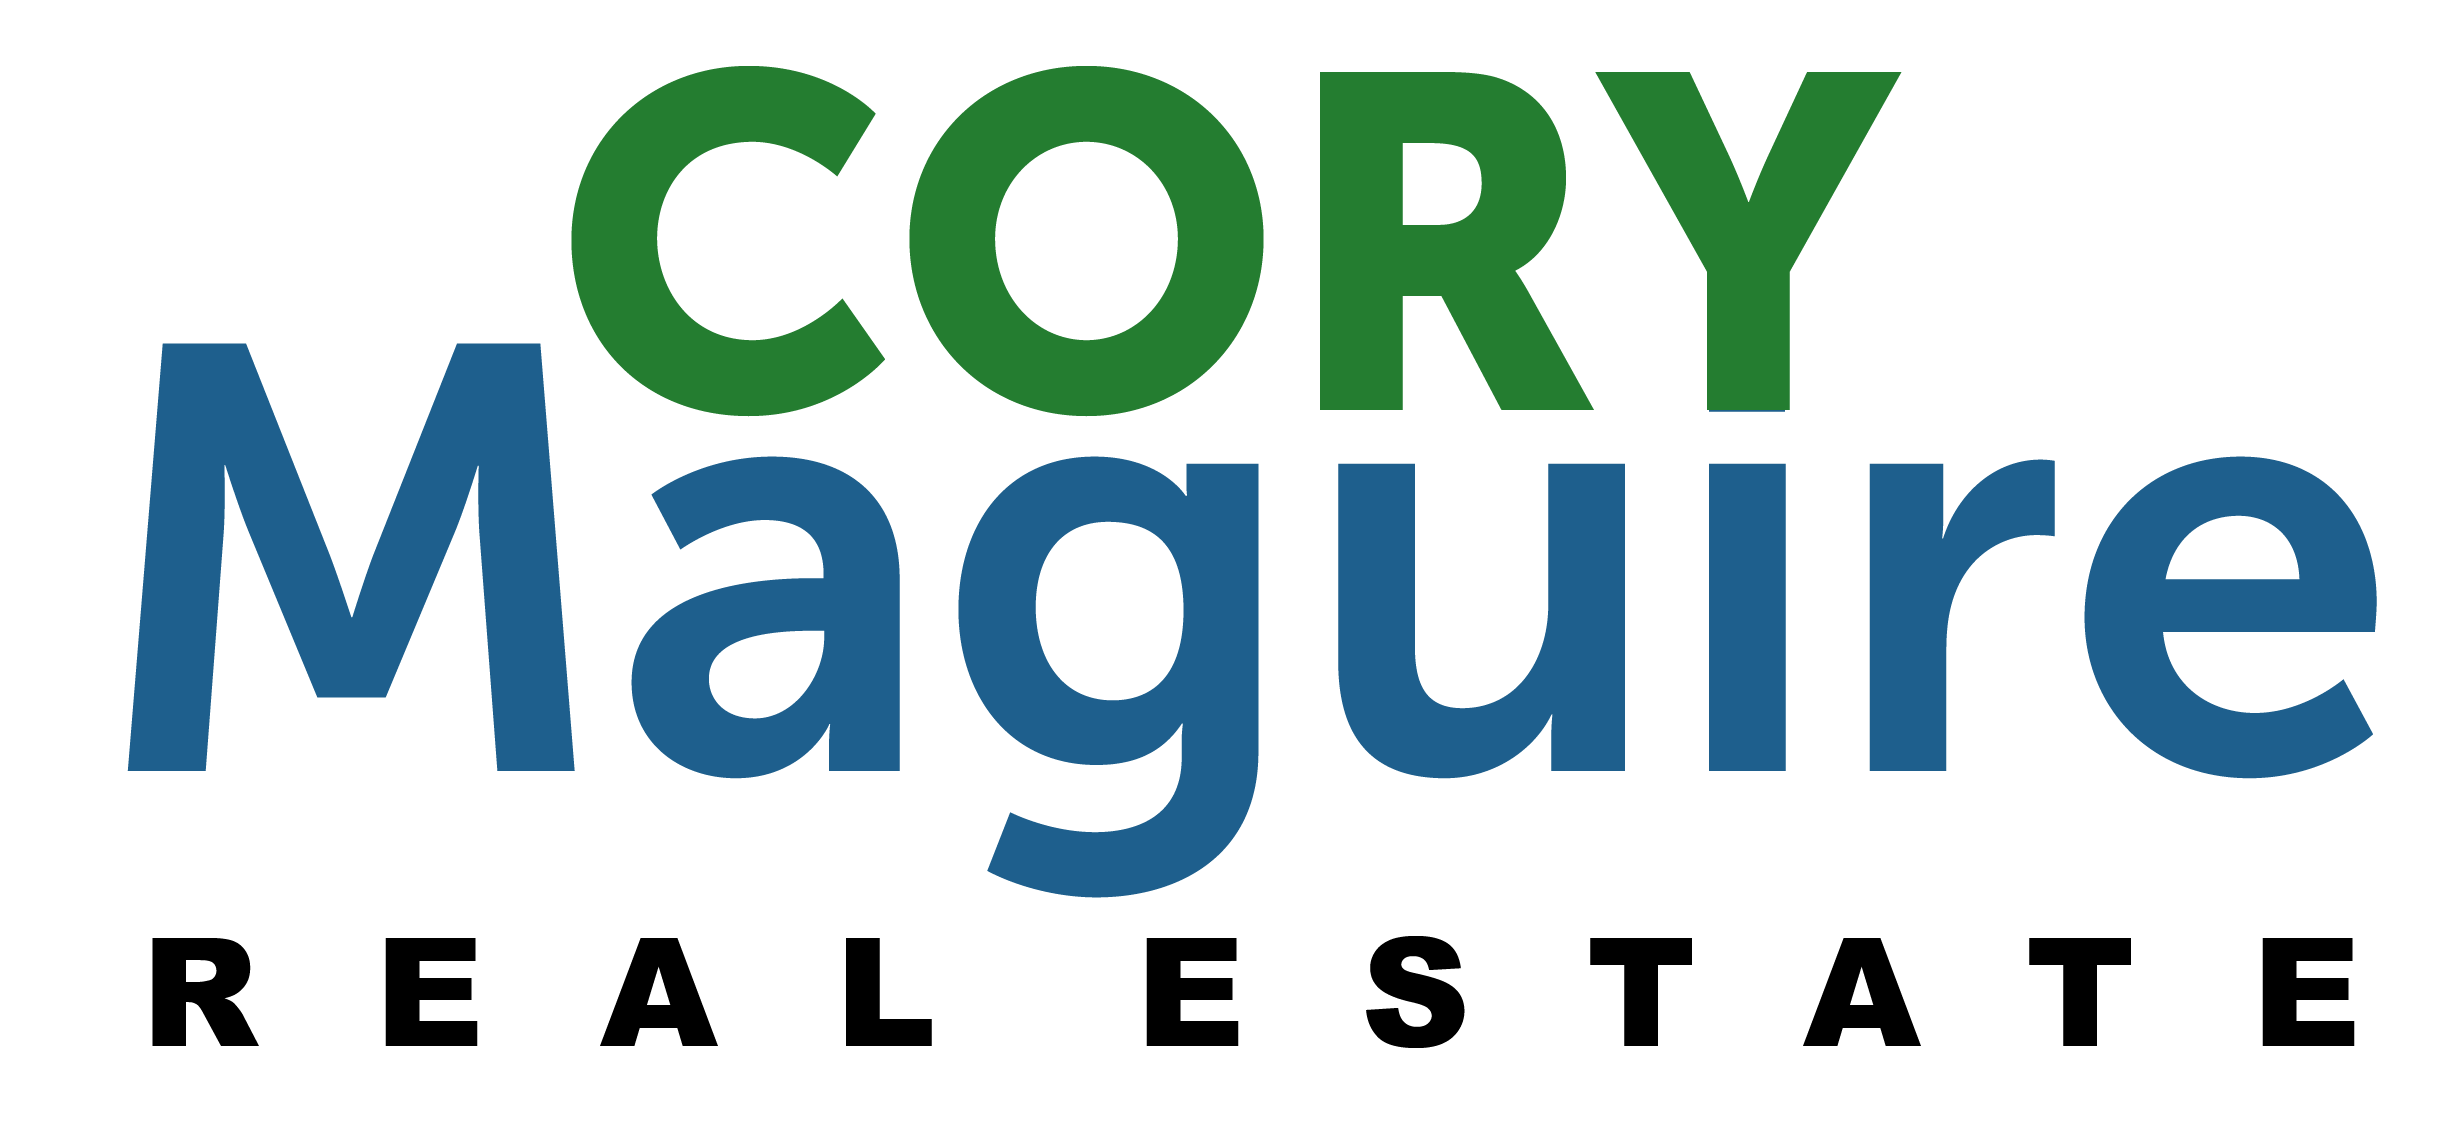 Cory Maguire logo svg